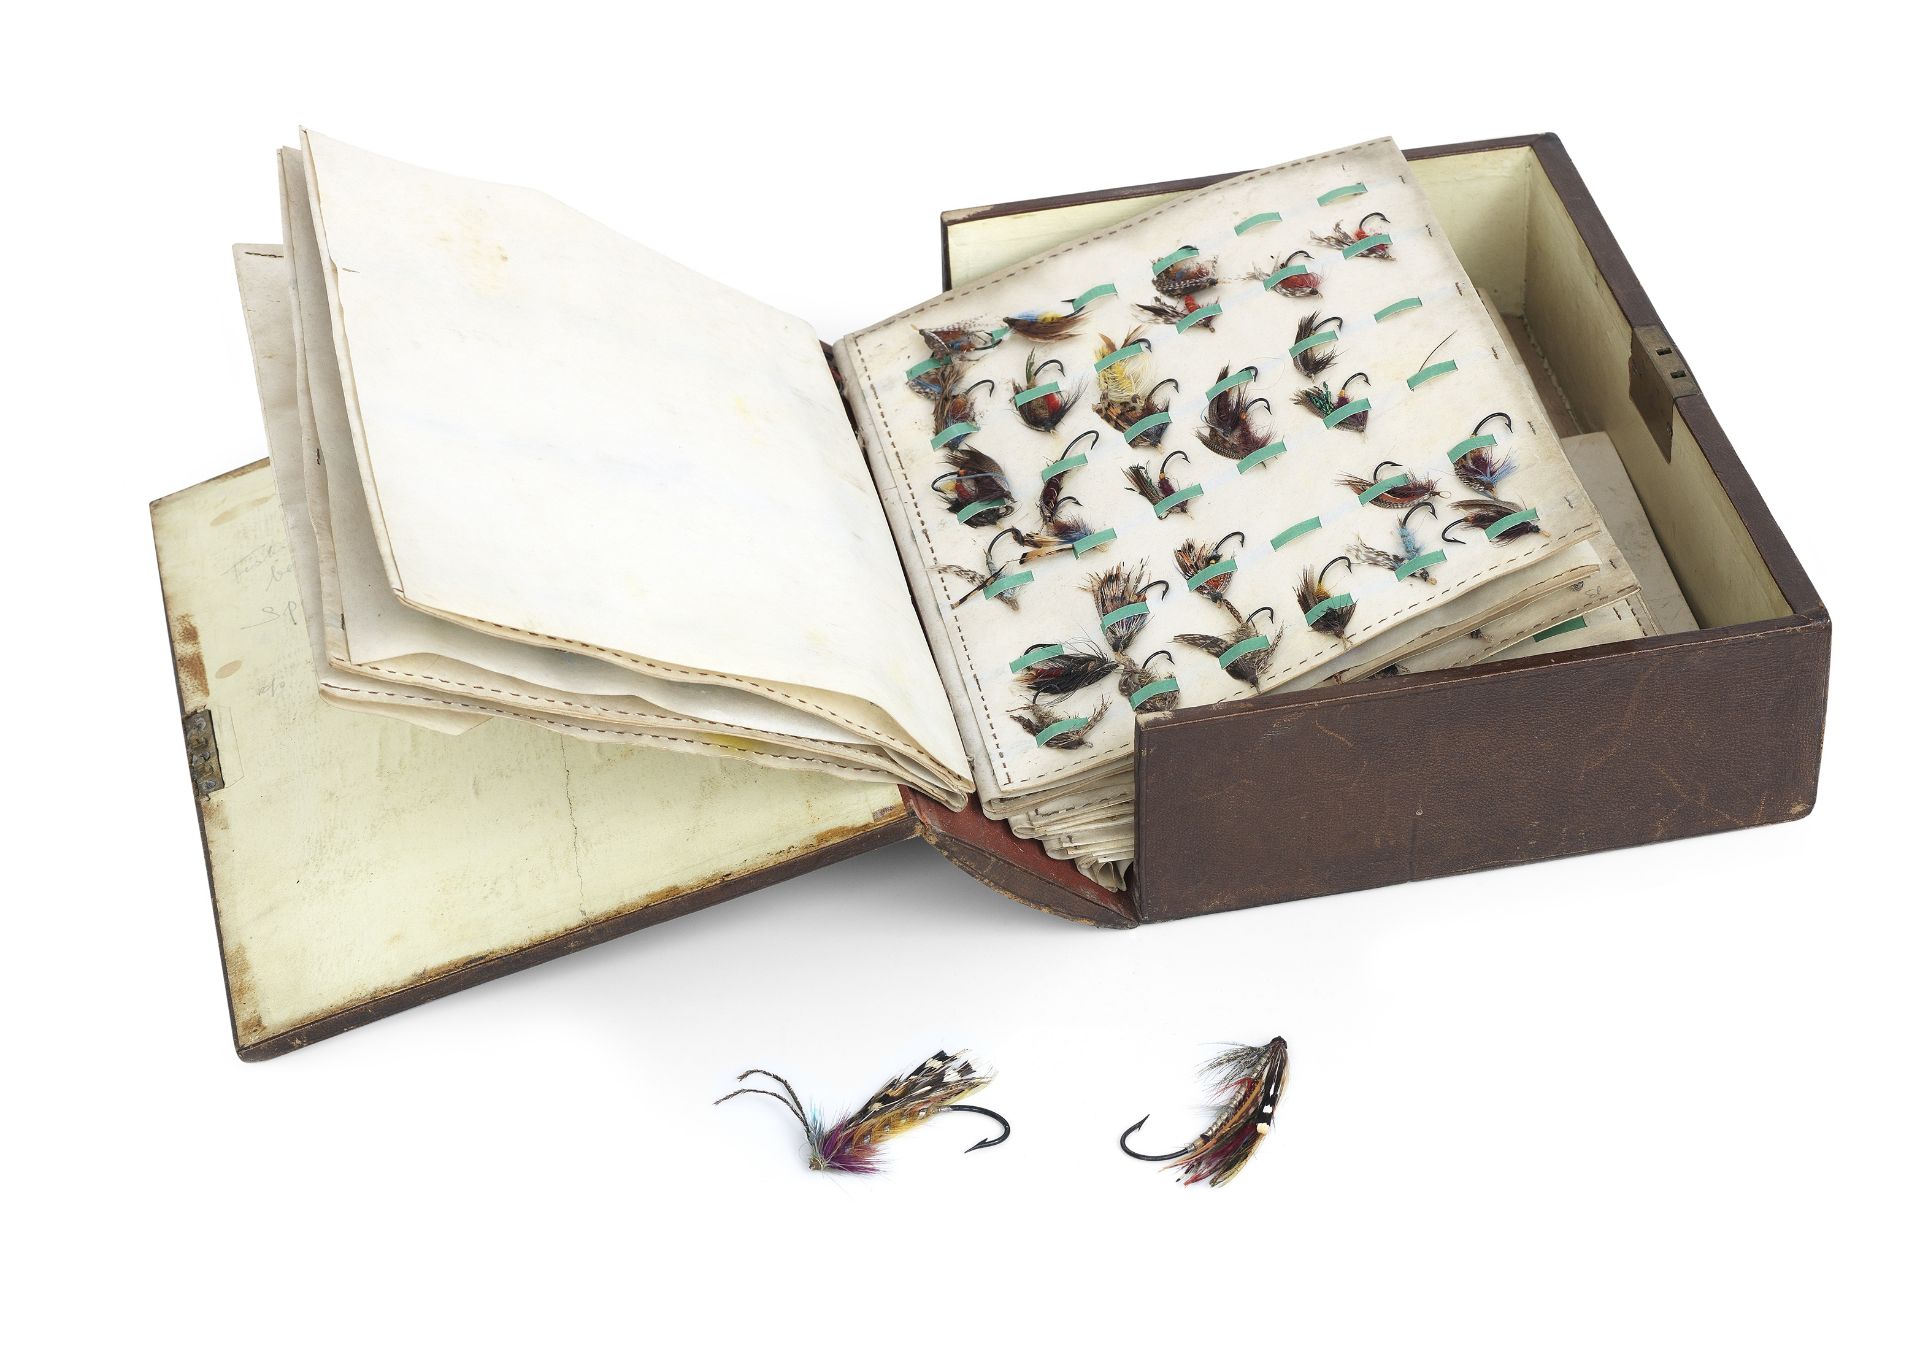 A large leather fly reservoir in the form of a book